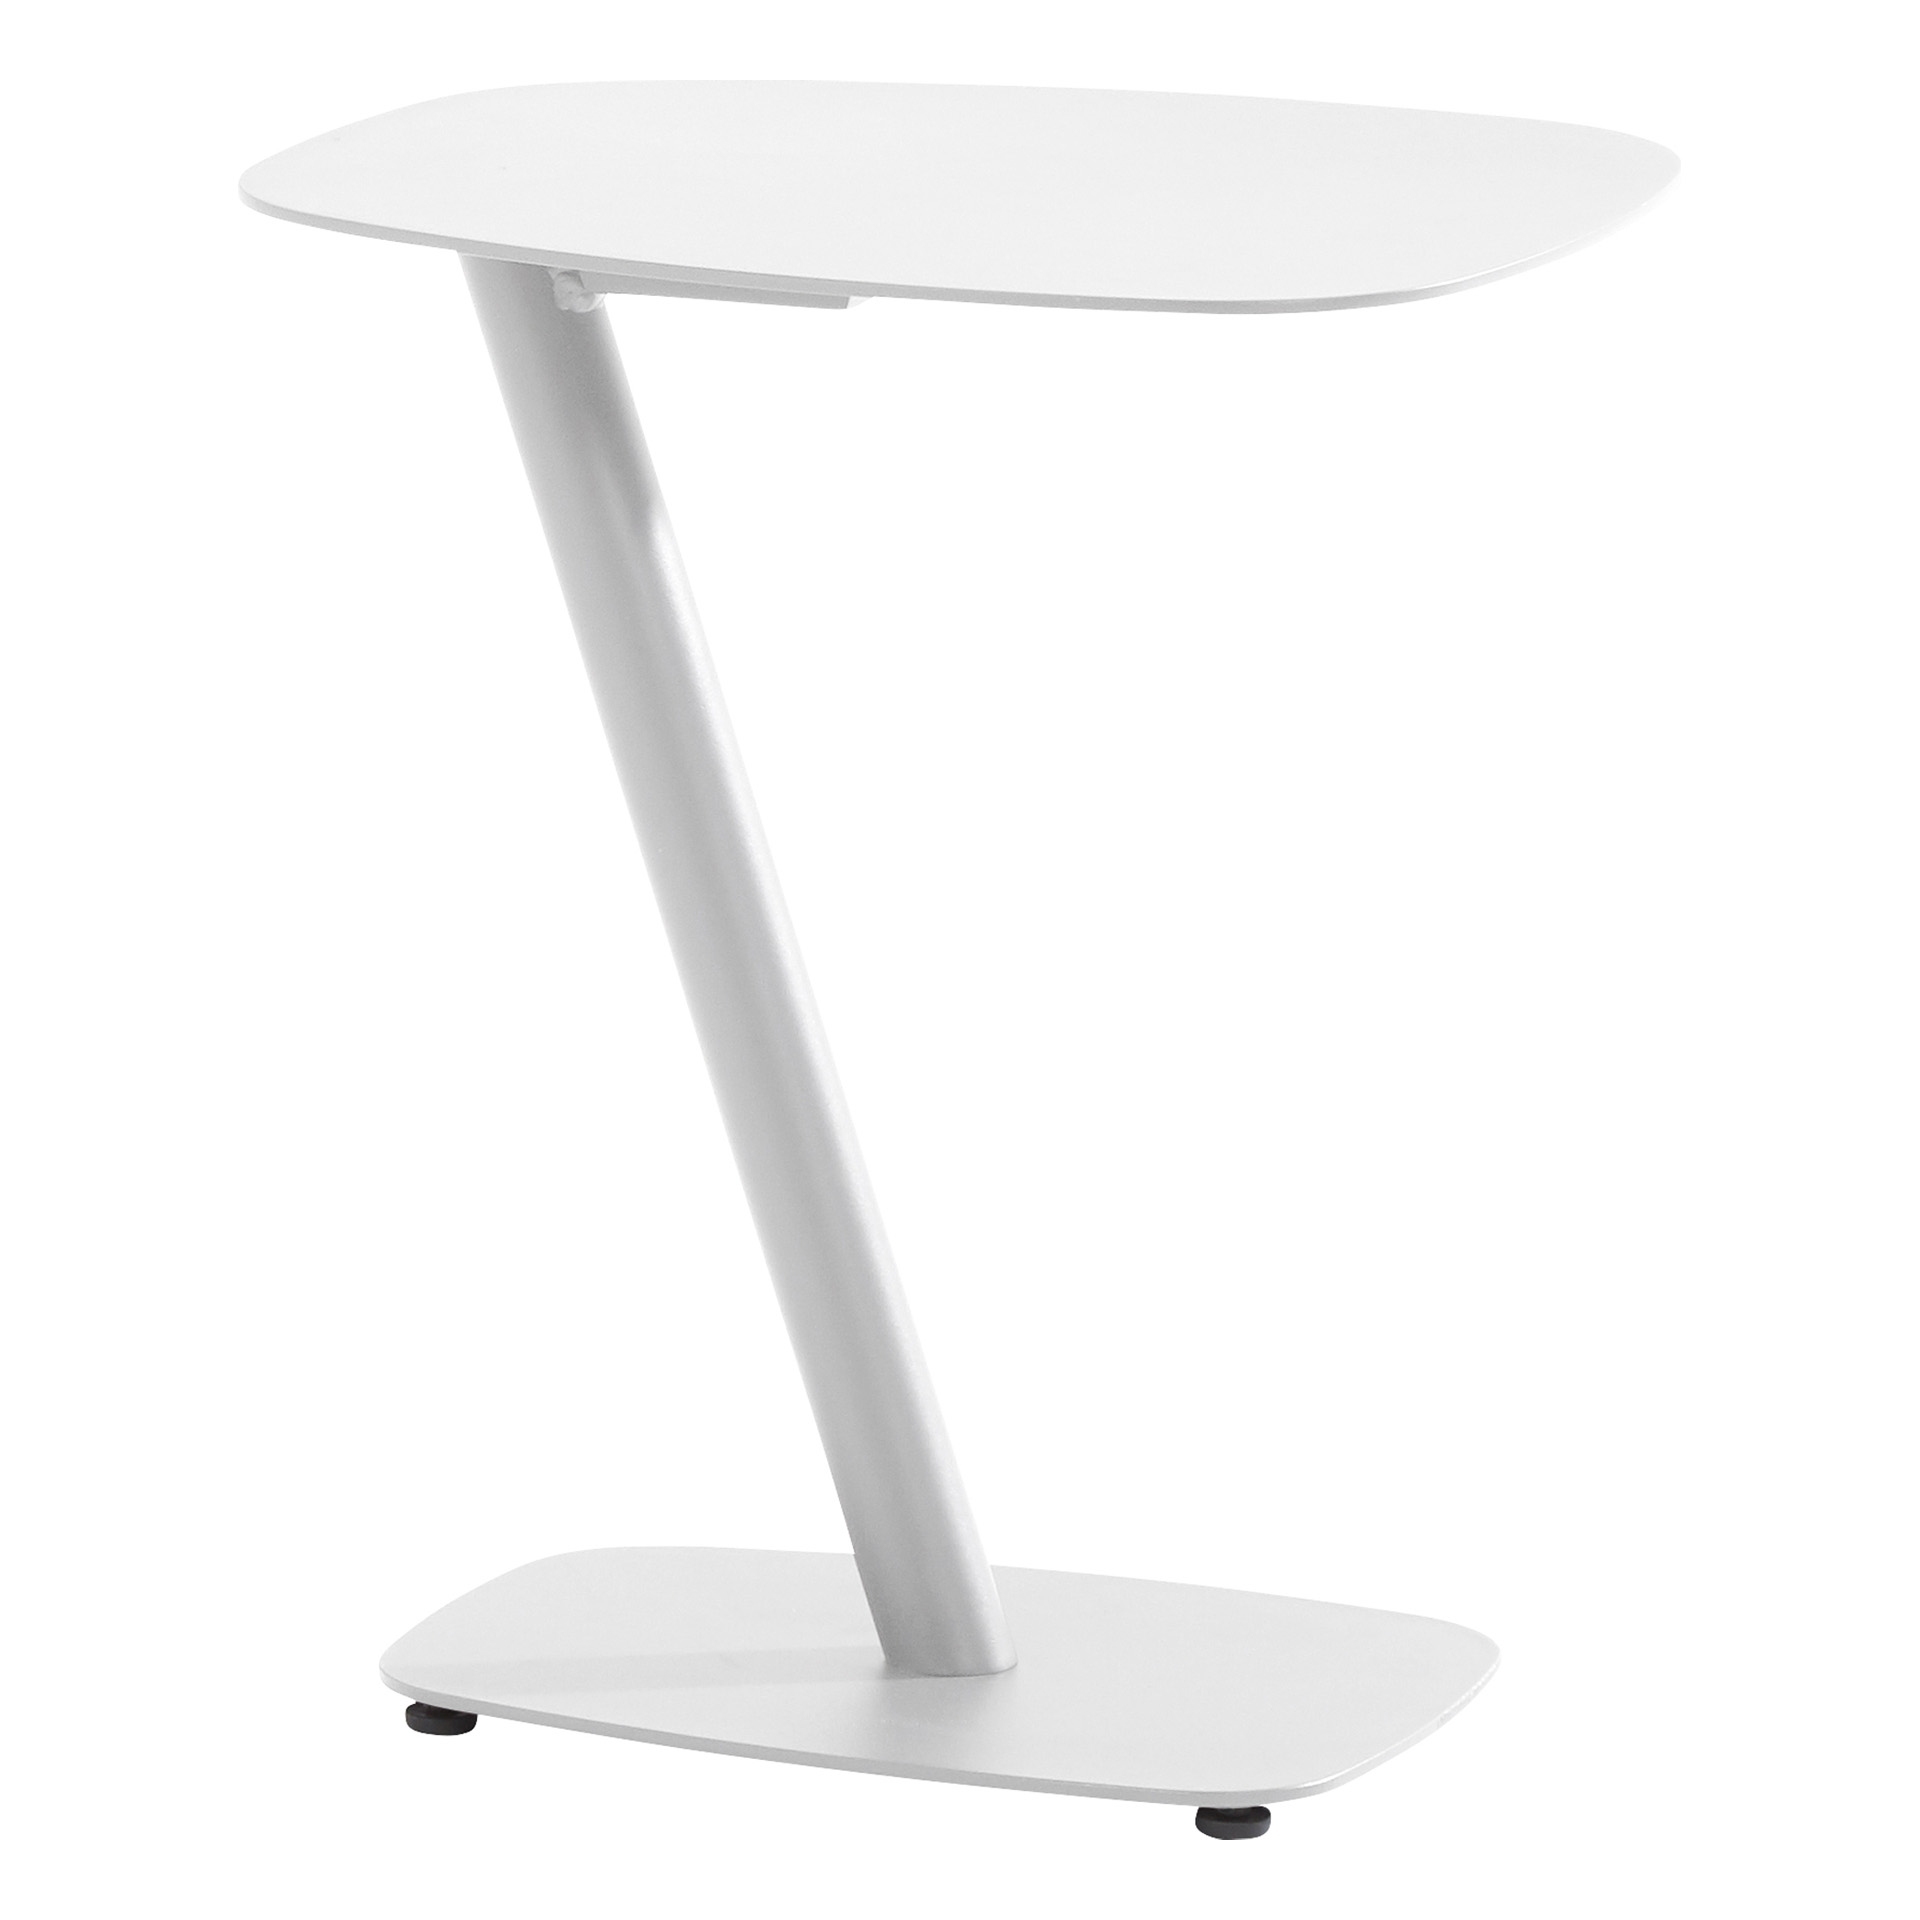 Panino support table white